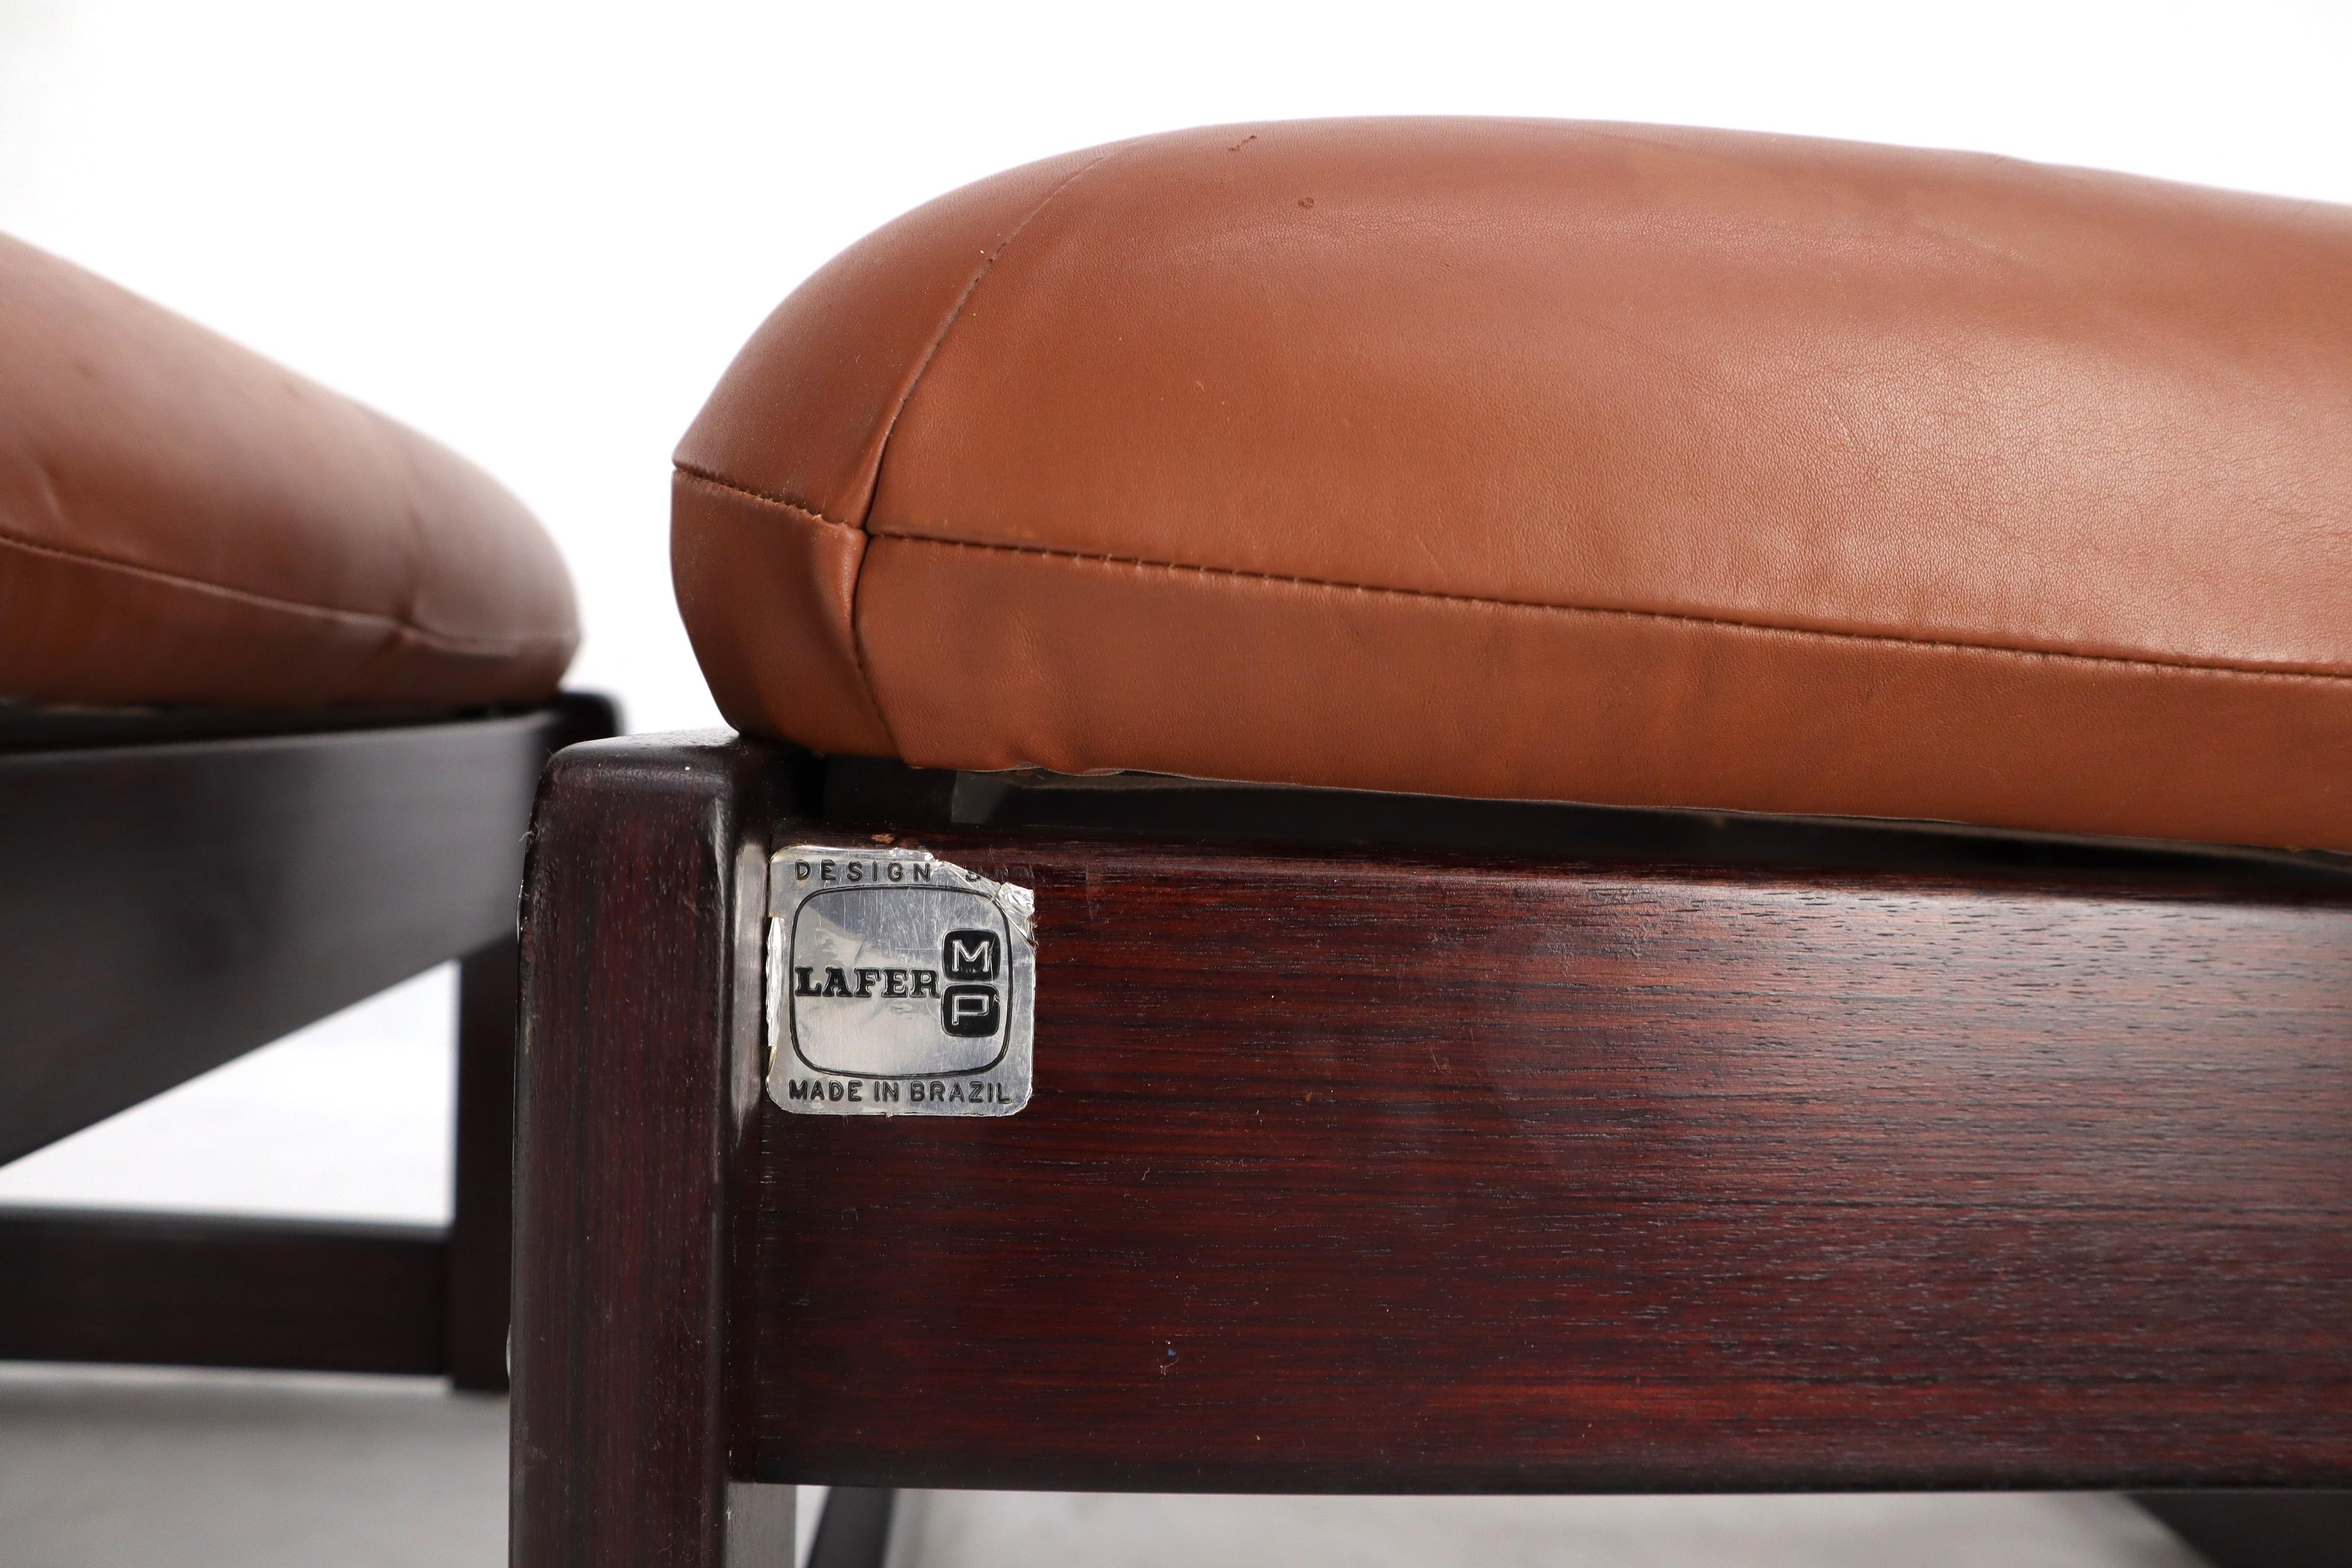 Pair of Mid-Century Modern Brazilian rosewood tan leather upholstery foot stools benches.